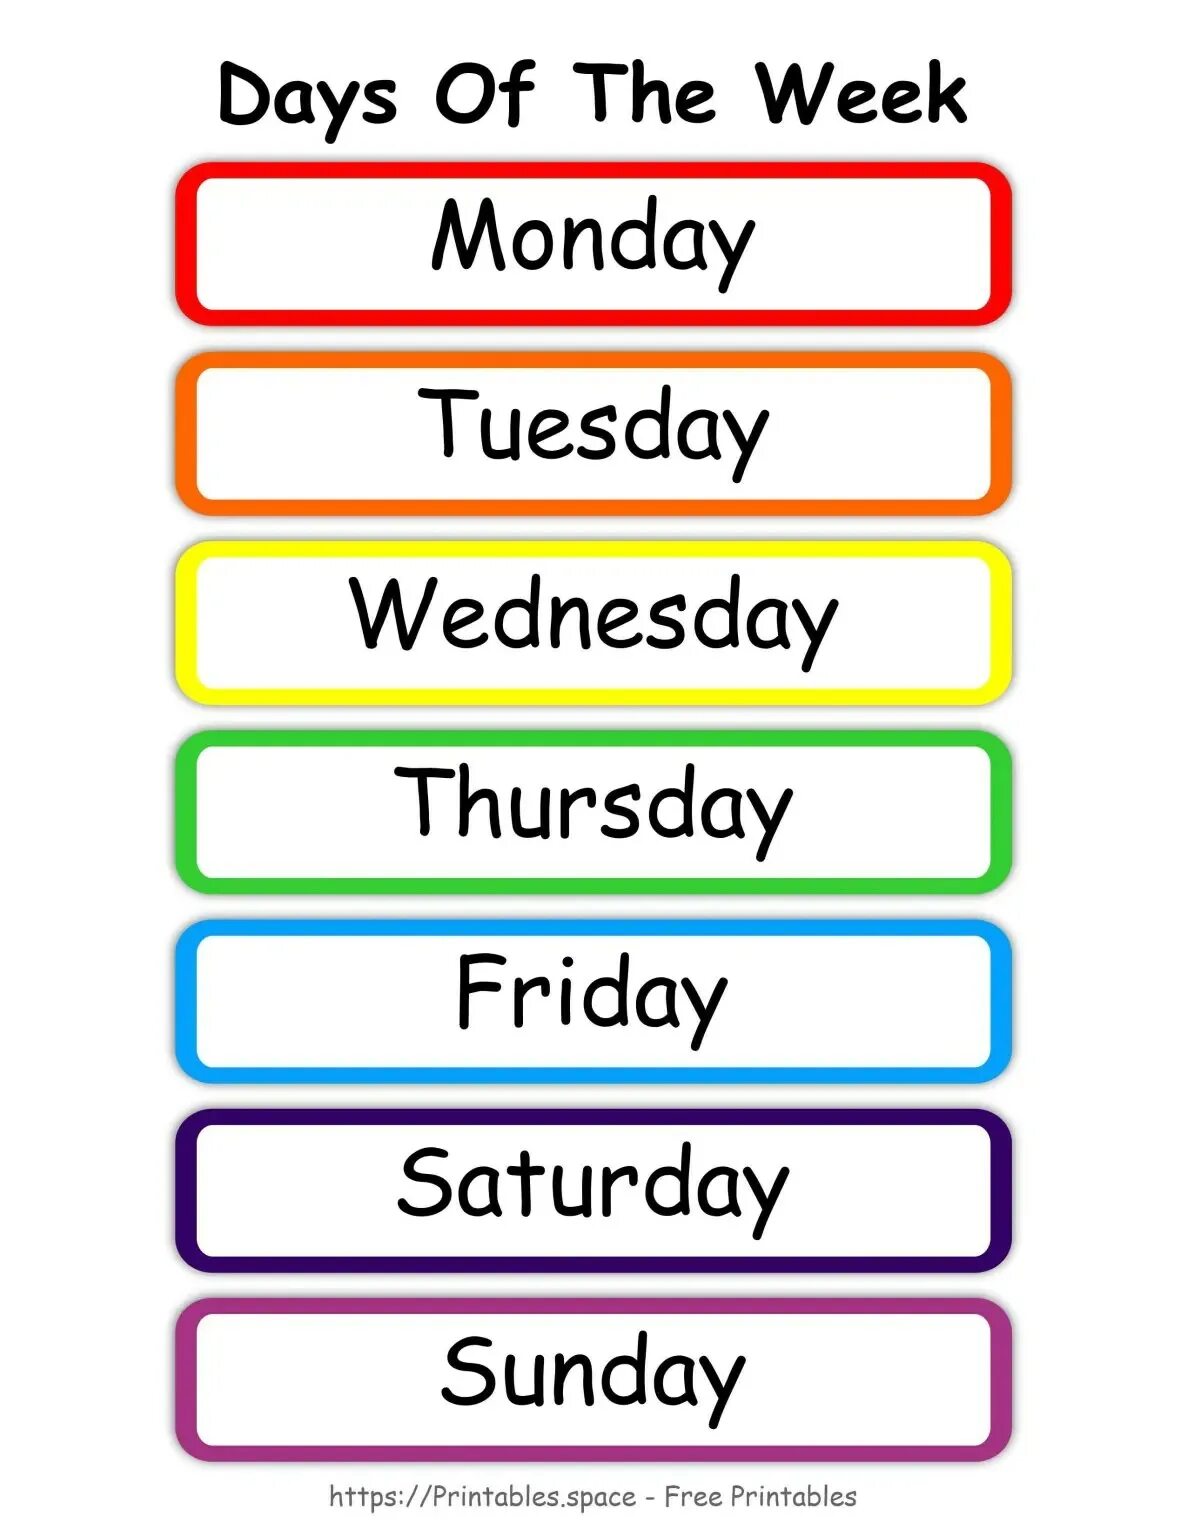 Picture of the week. Days of the week. Days of the week плакат. English Days of the week. Days of the week for Kids.